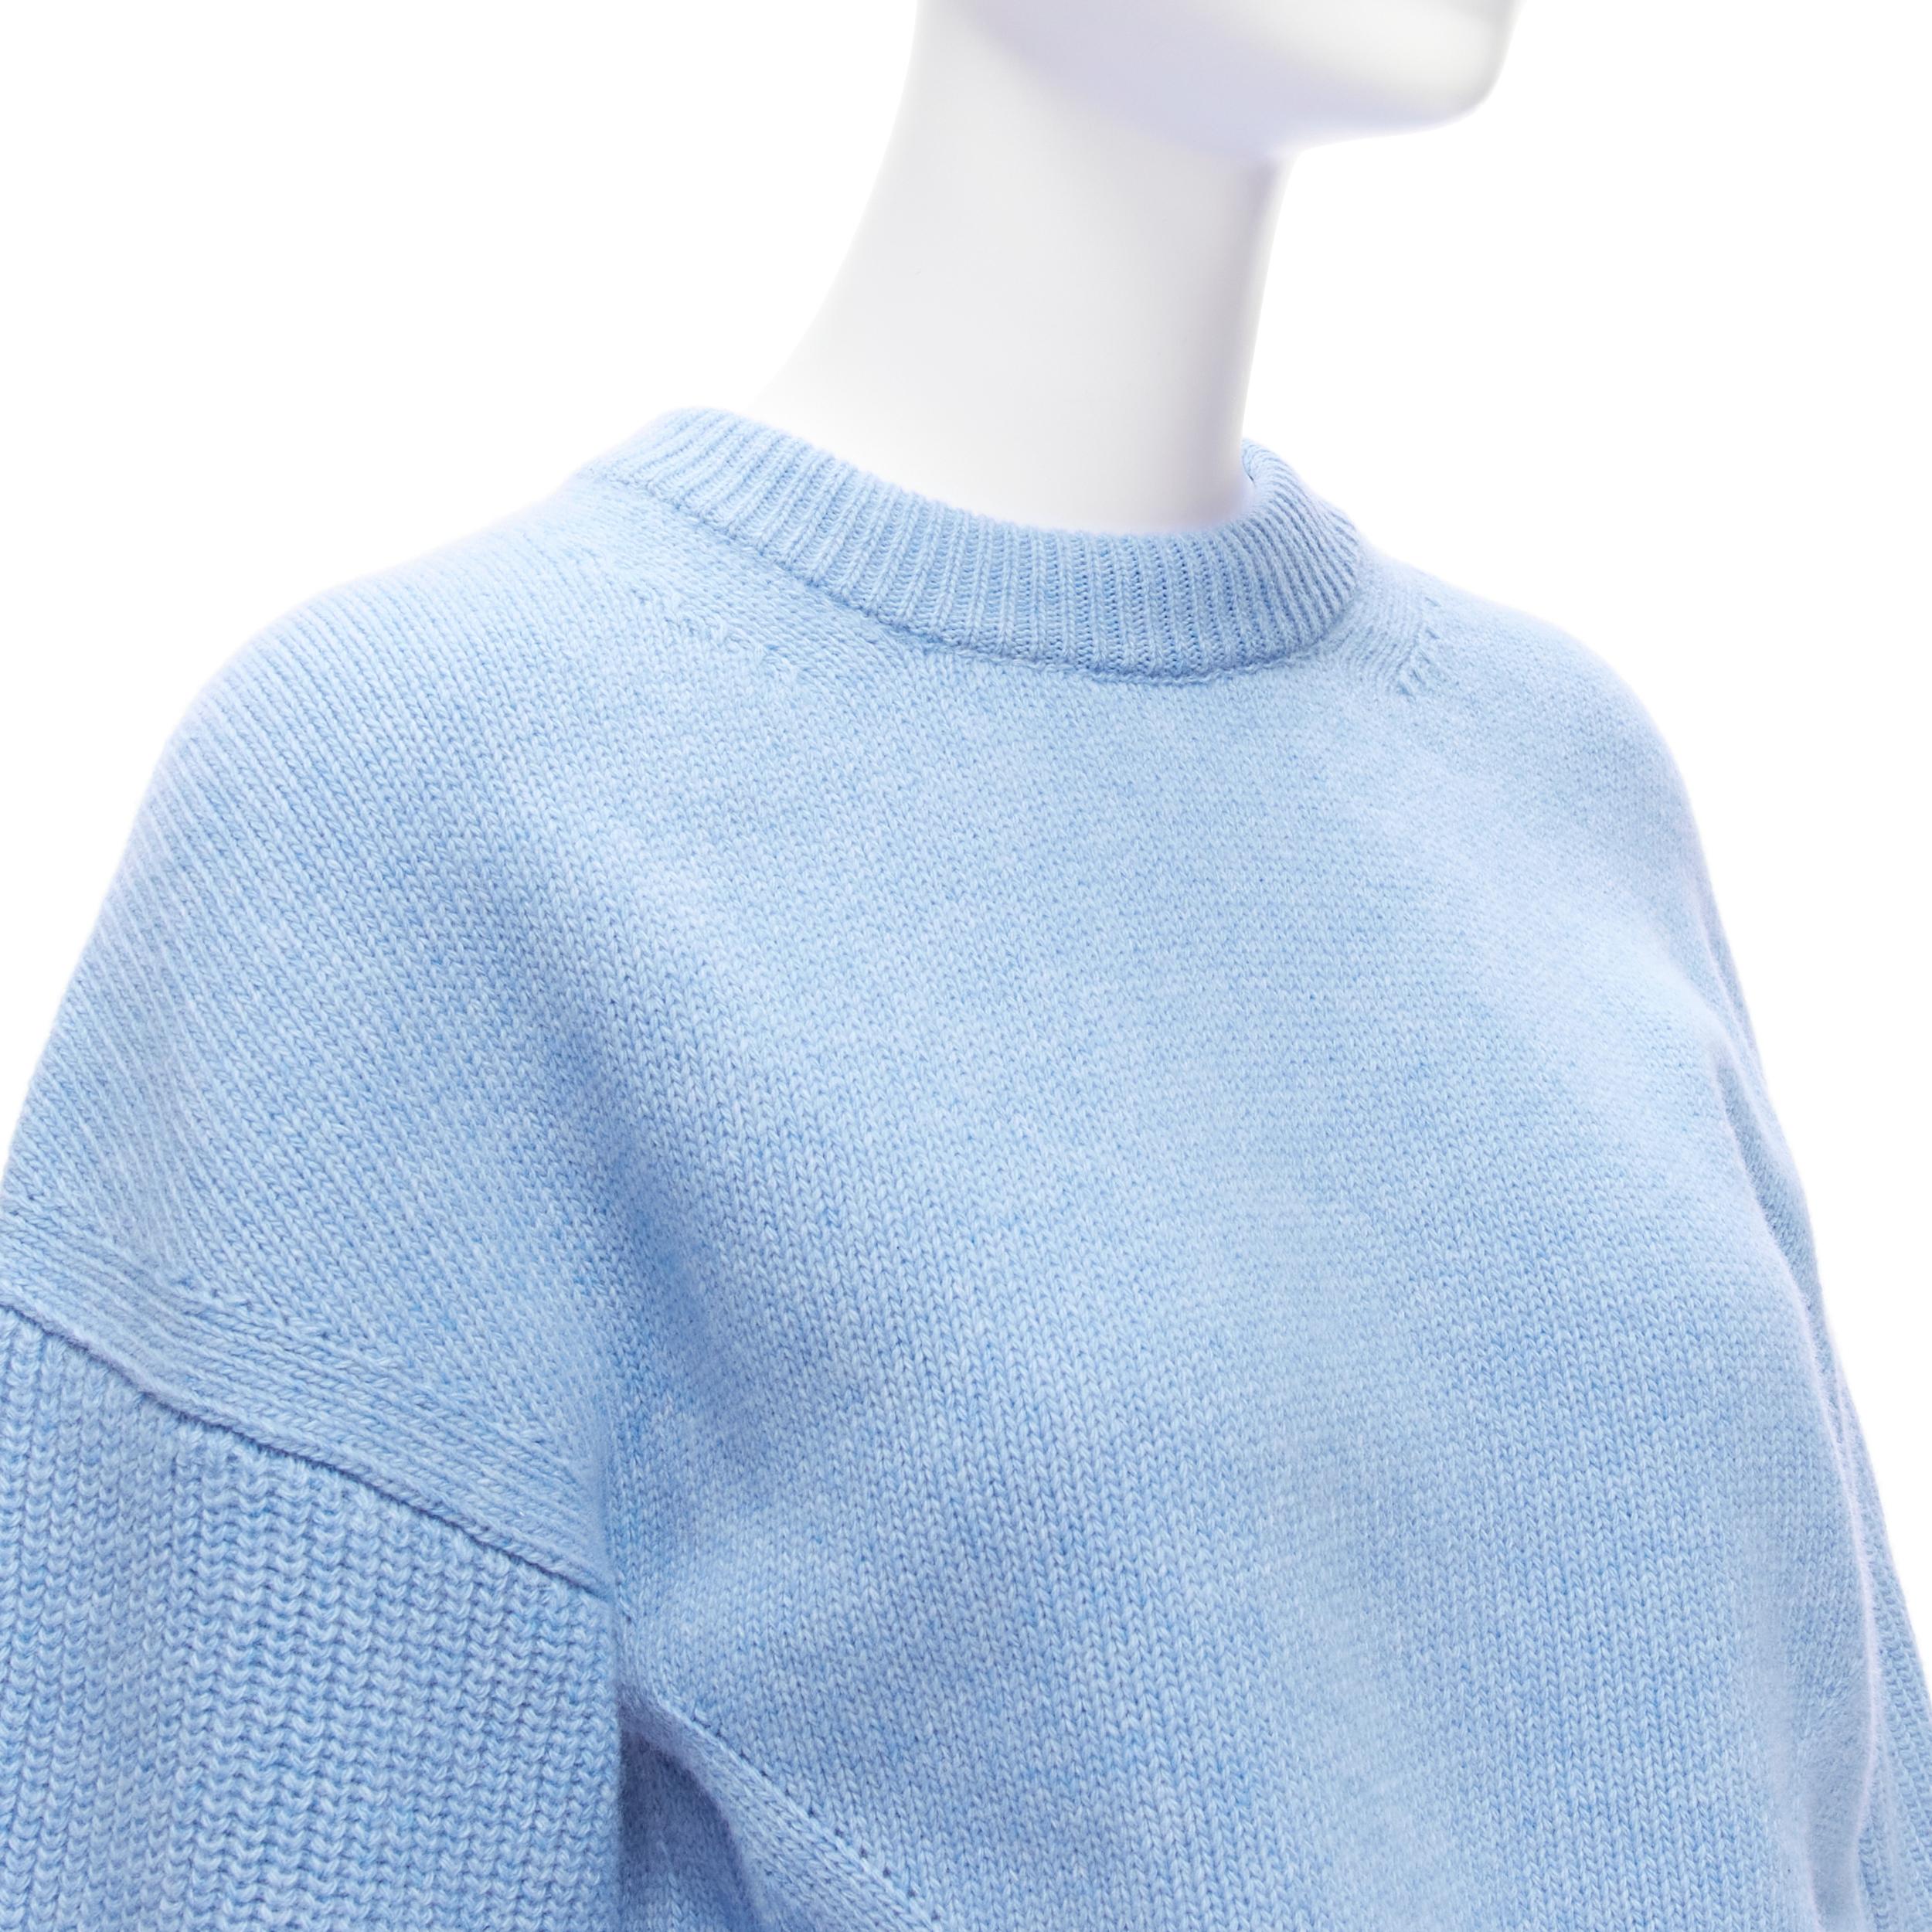 ALEXANDER MCQUEEN 2021 powder blue speckled wool boxy cropped sweater XS
Reference: AAWC/A00481
Brand: Alexander McQueen
Designer: Sarah Burton
Collection: 2021
Material: Wool
Color: Blue
Pattern: Solid
Closure: Pullover
Made in: